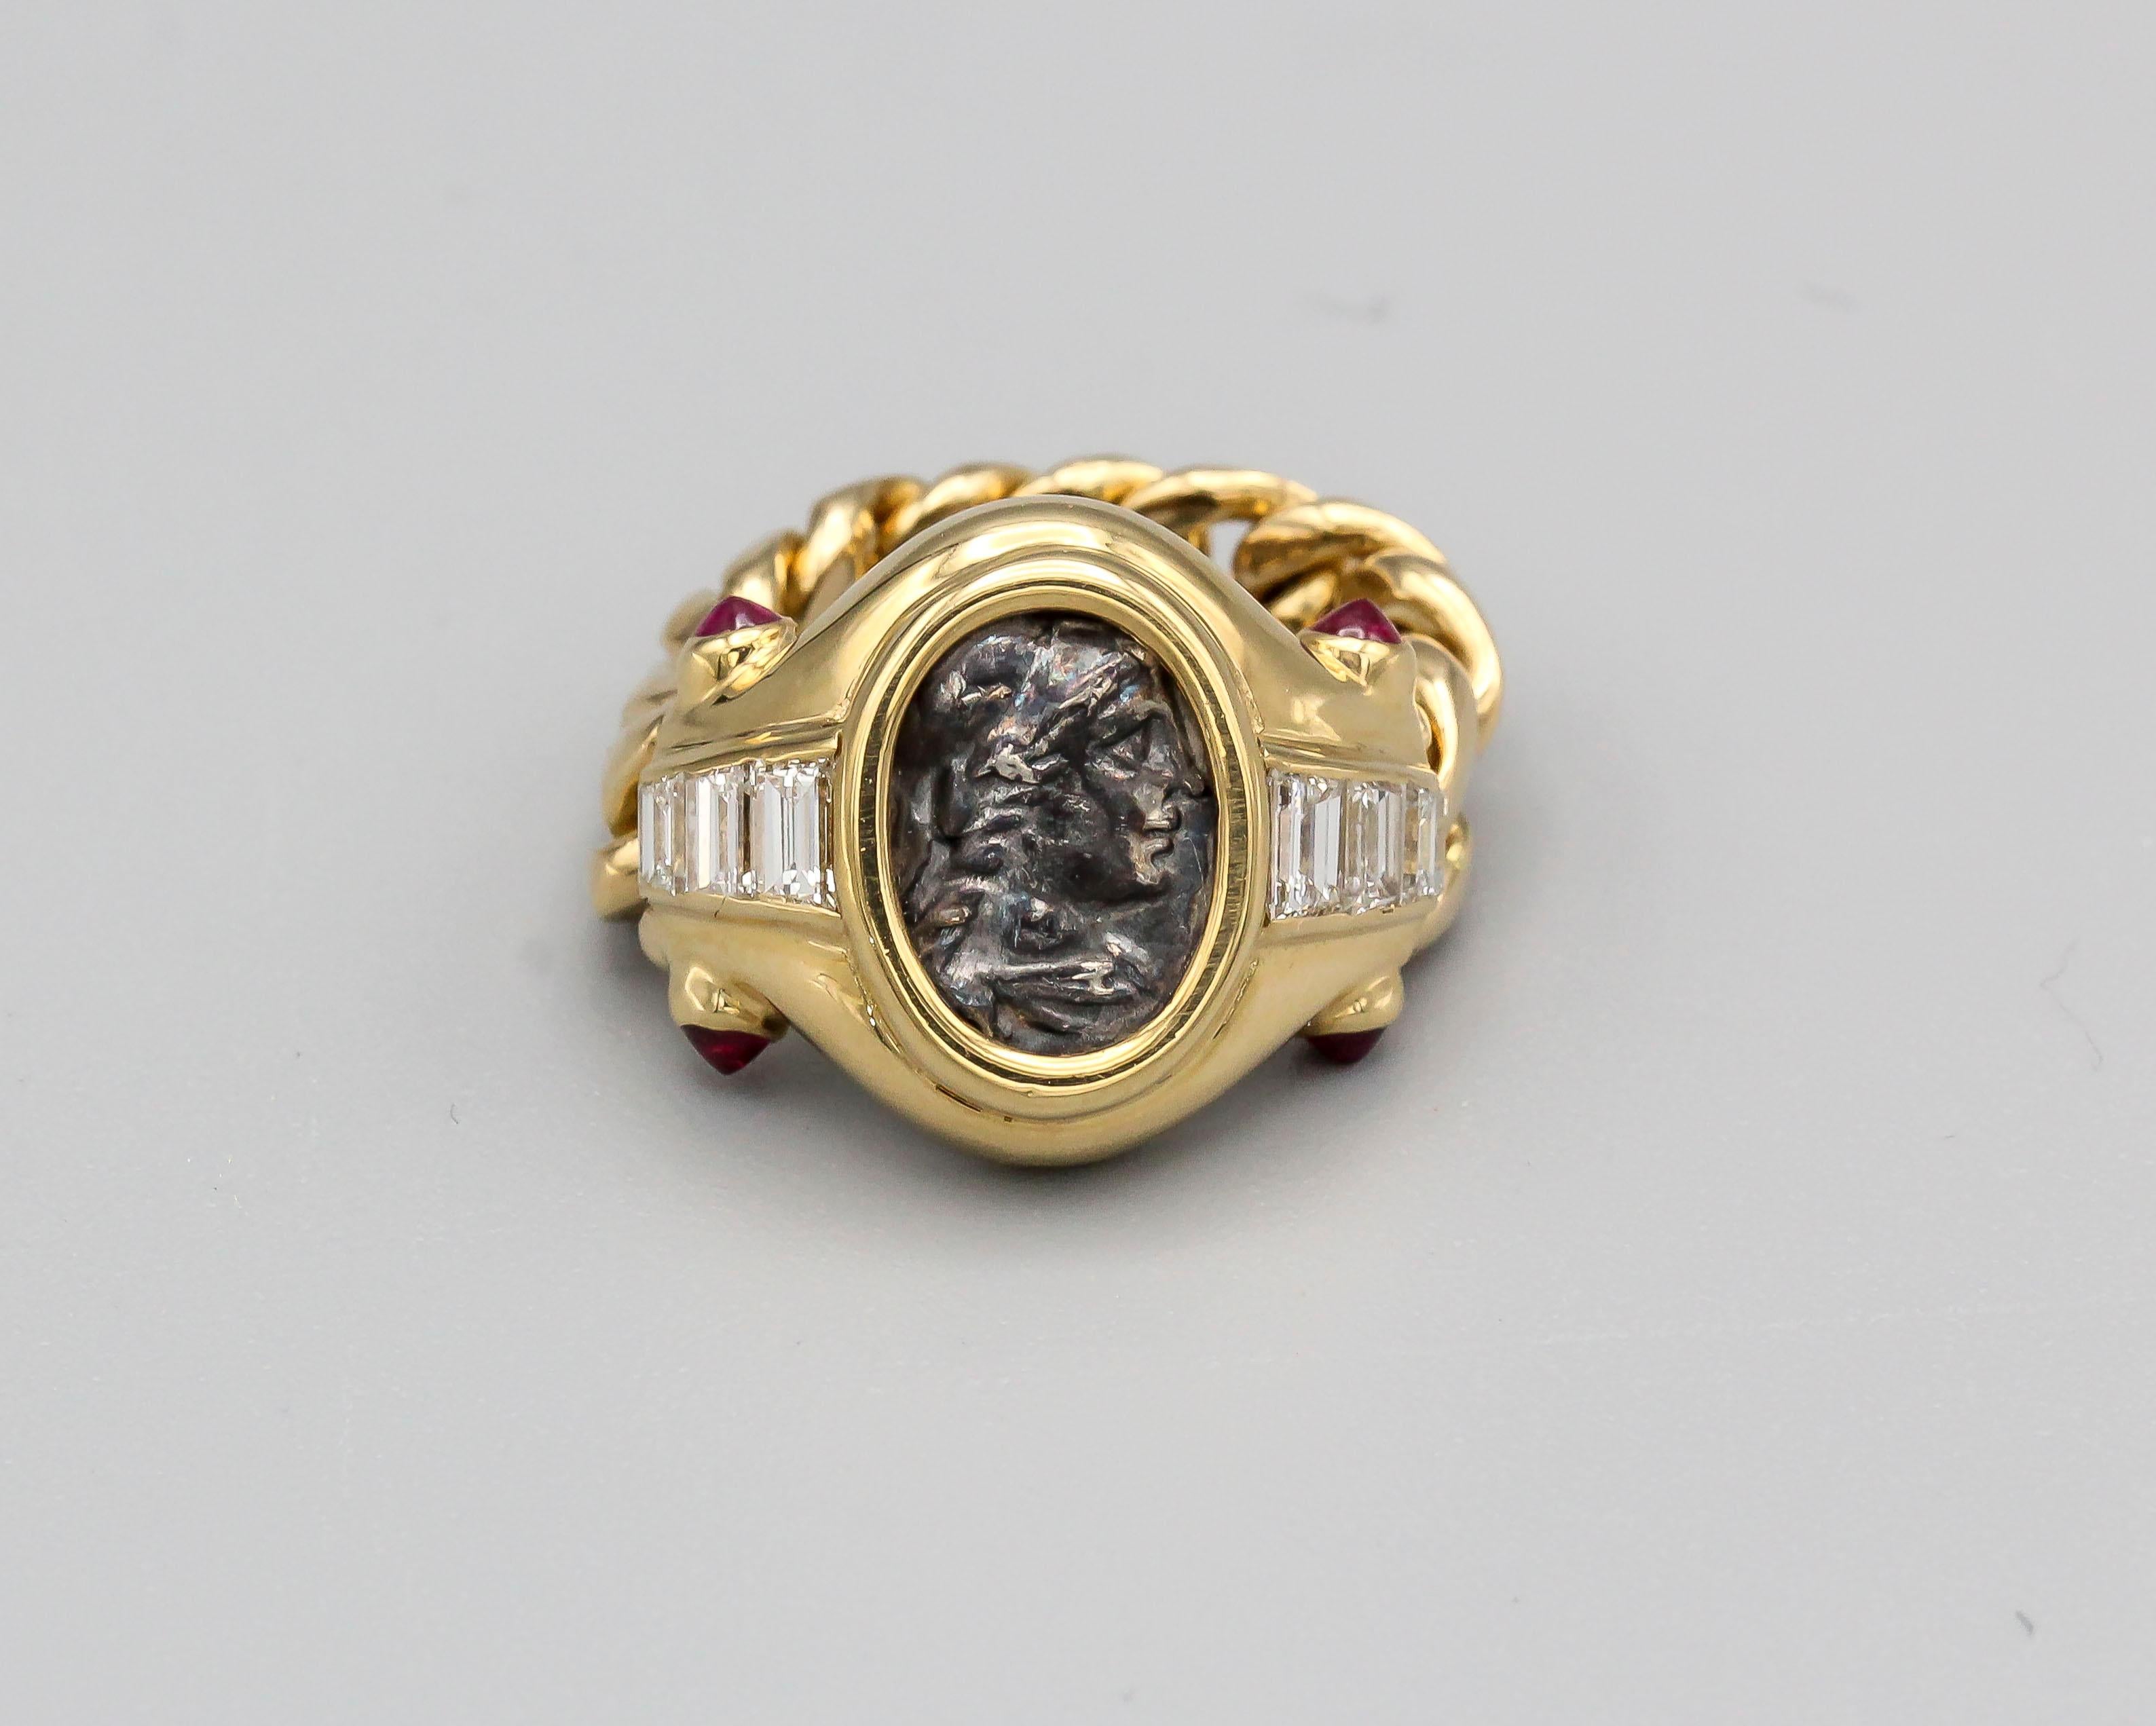 Rare and unusual diamond, ruby, ancient Roman coin and 18K yellow gold flexible ring by Bulgari, circa 1970s. It features a Roman coin dated 2nd century B.C. Diamonds are high grade tapered baguette cut, with rich red rubies on sides. Approx. size